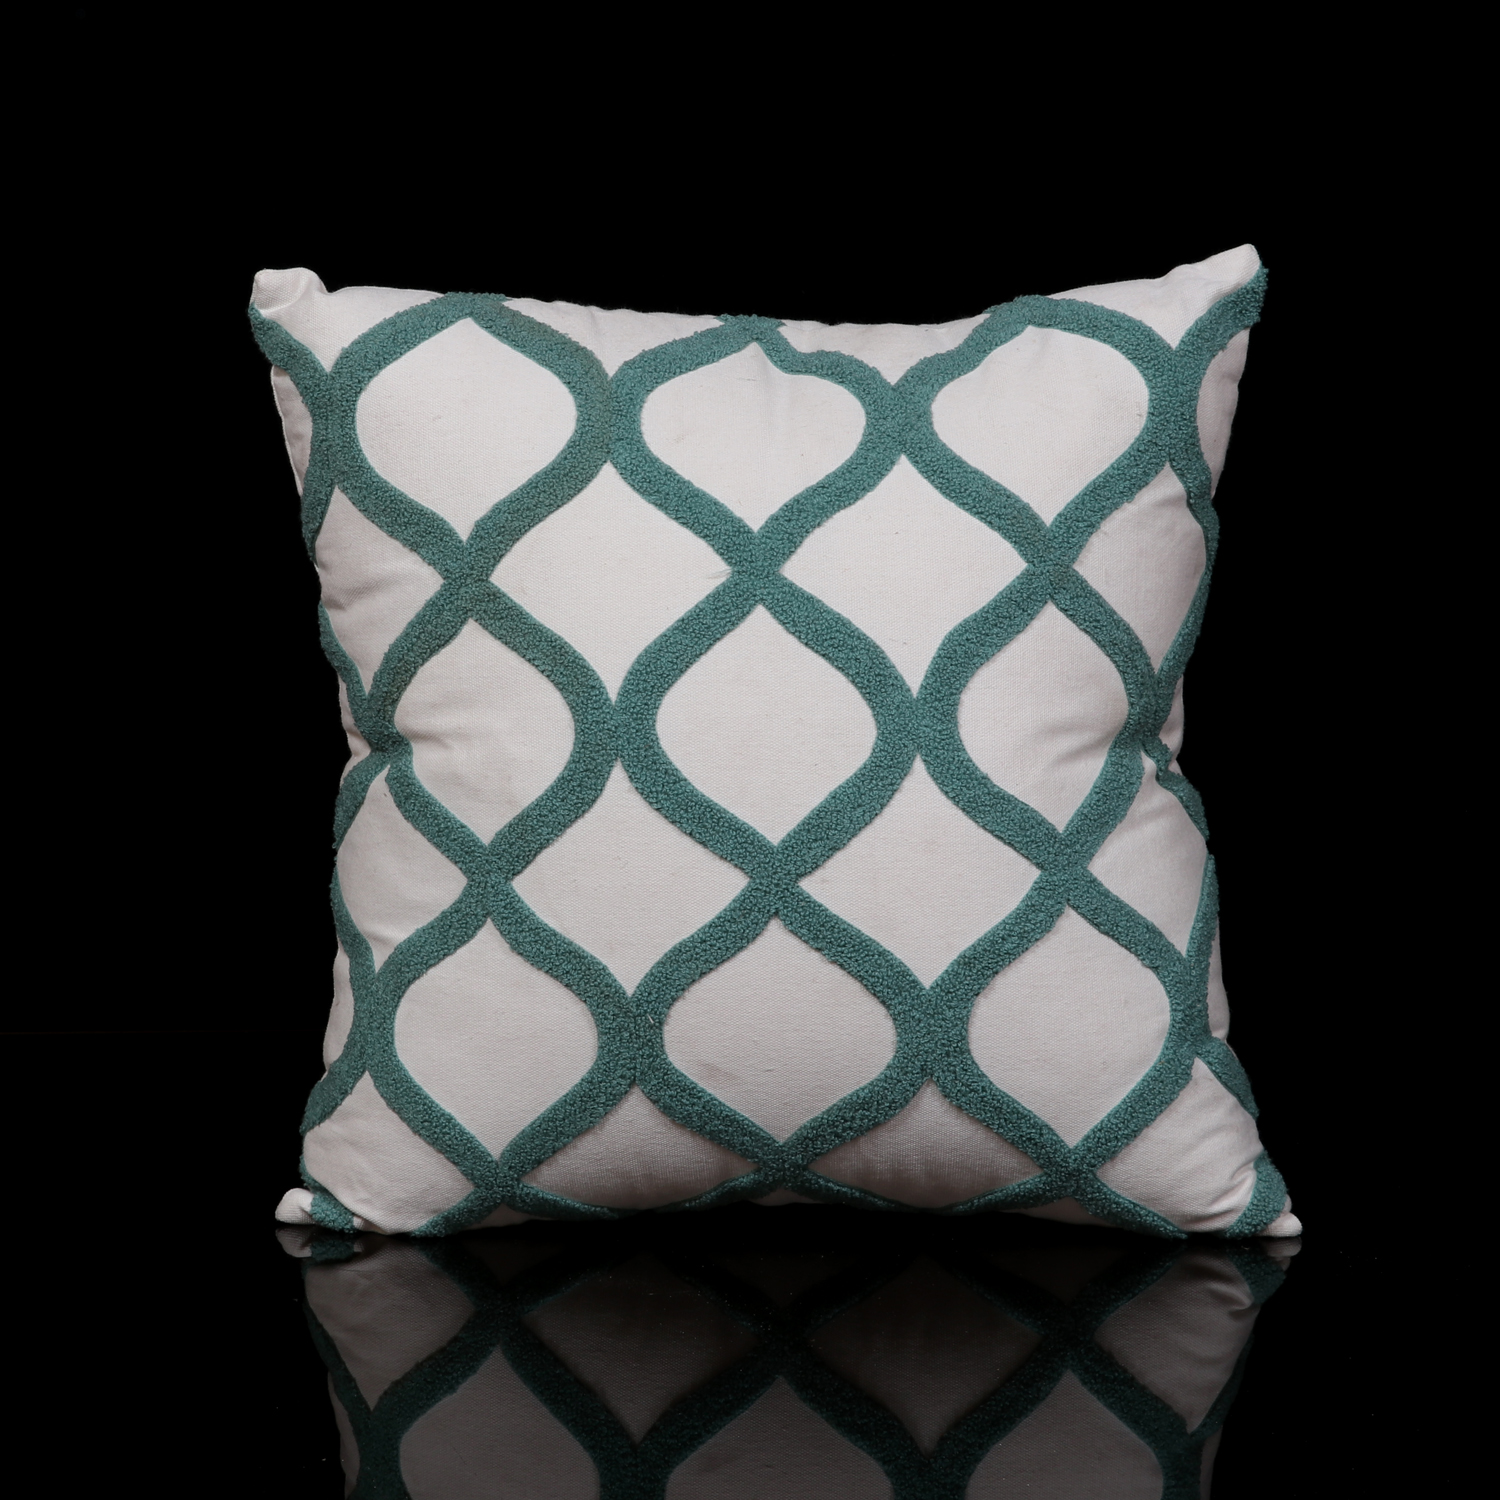 EMBROIDERED CRISS CROSS WAVE DESIGN PILLOW